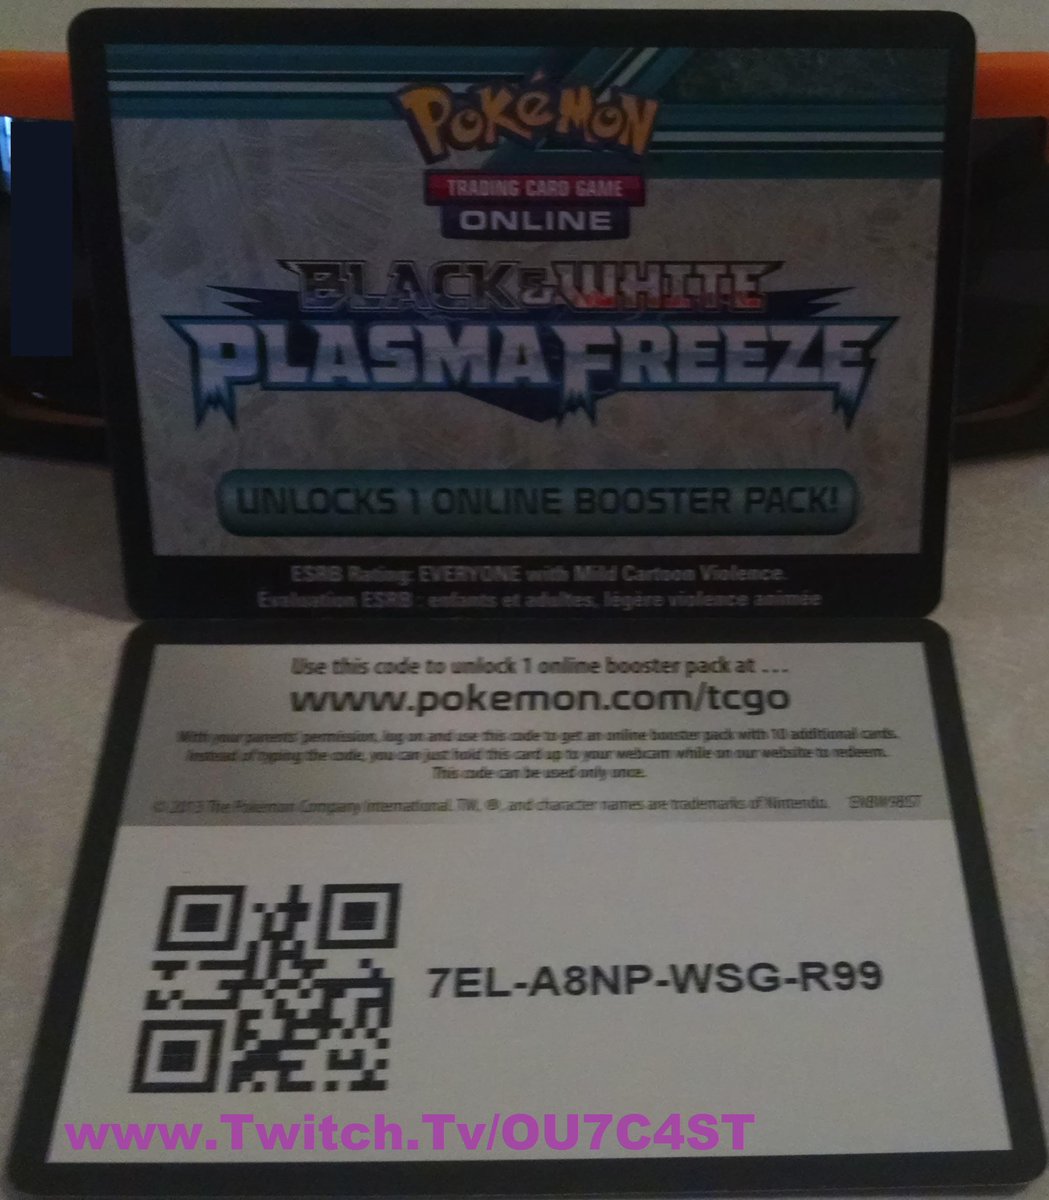 Pokemon HD: Pokemon Trading Card Game Online Booster Pack Codes Free